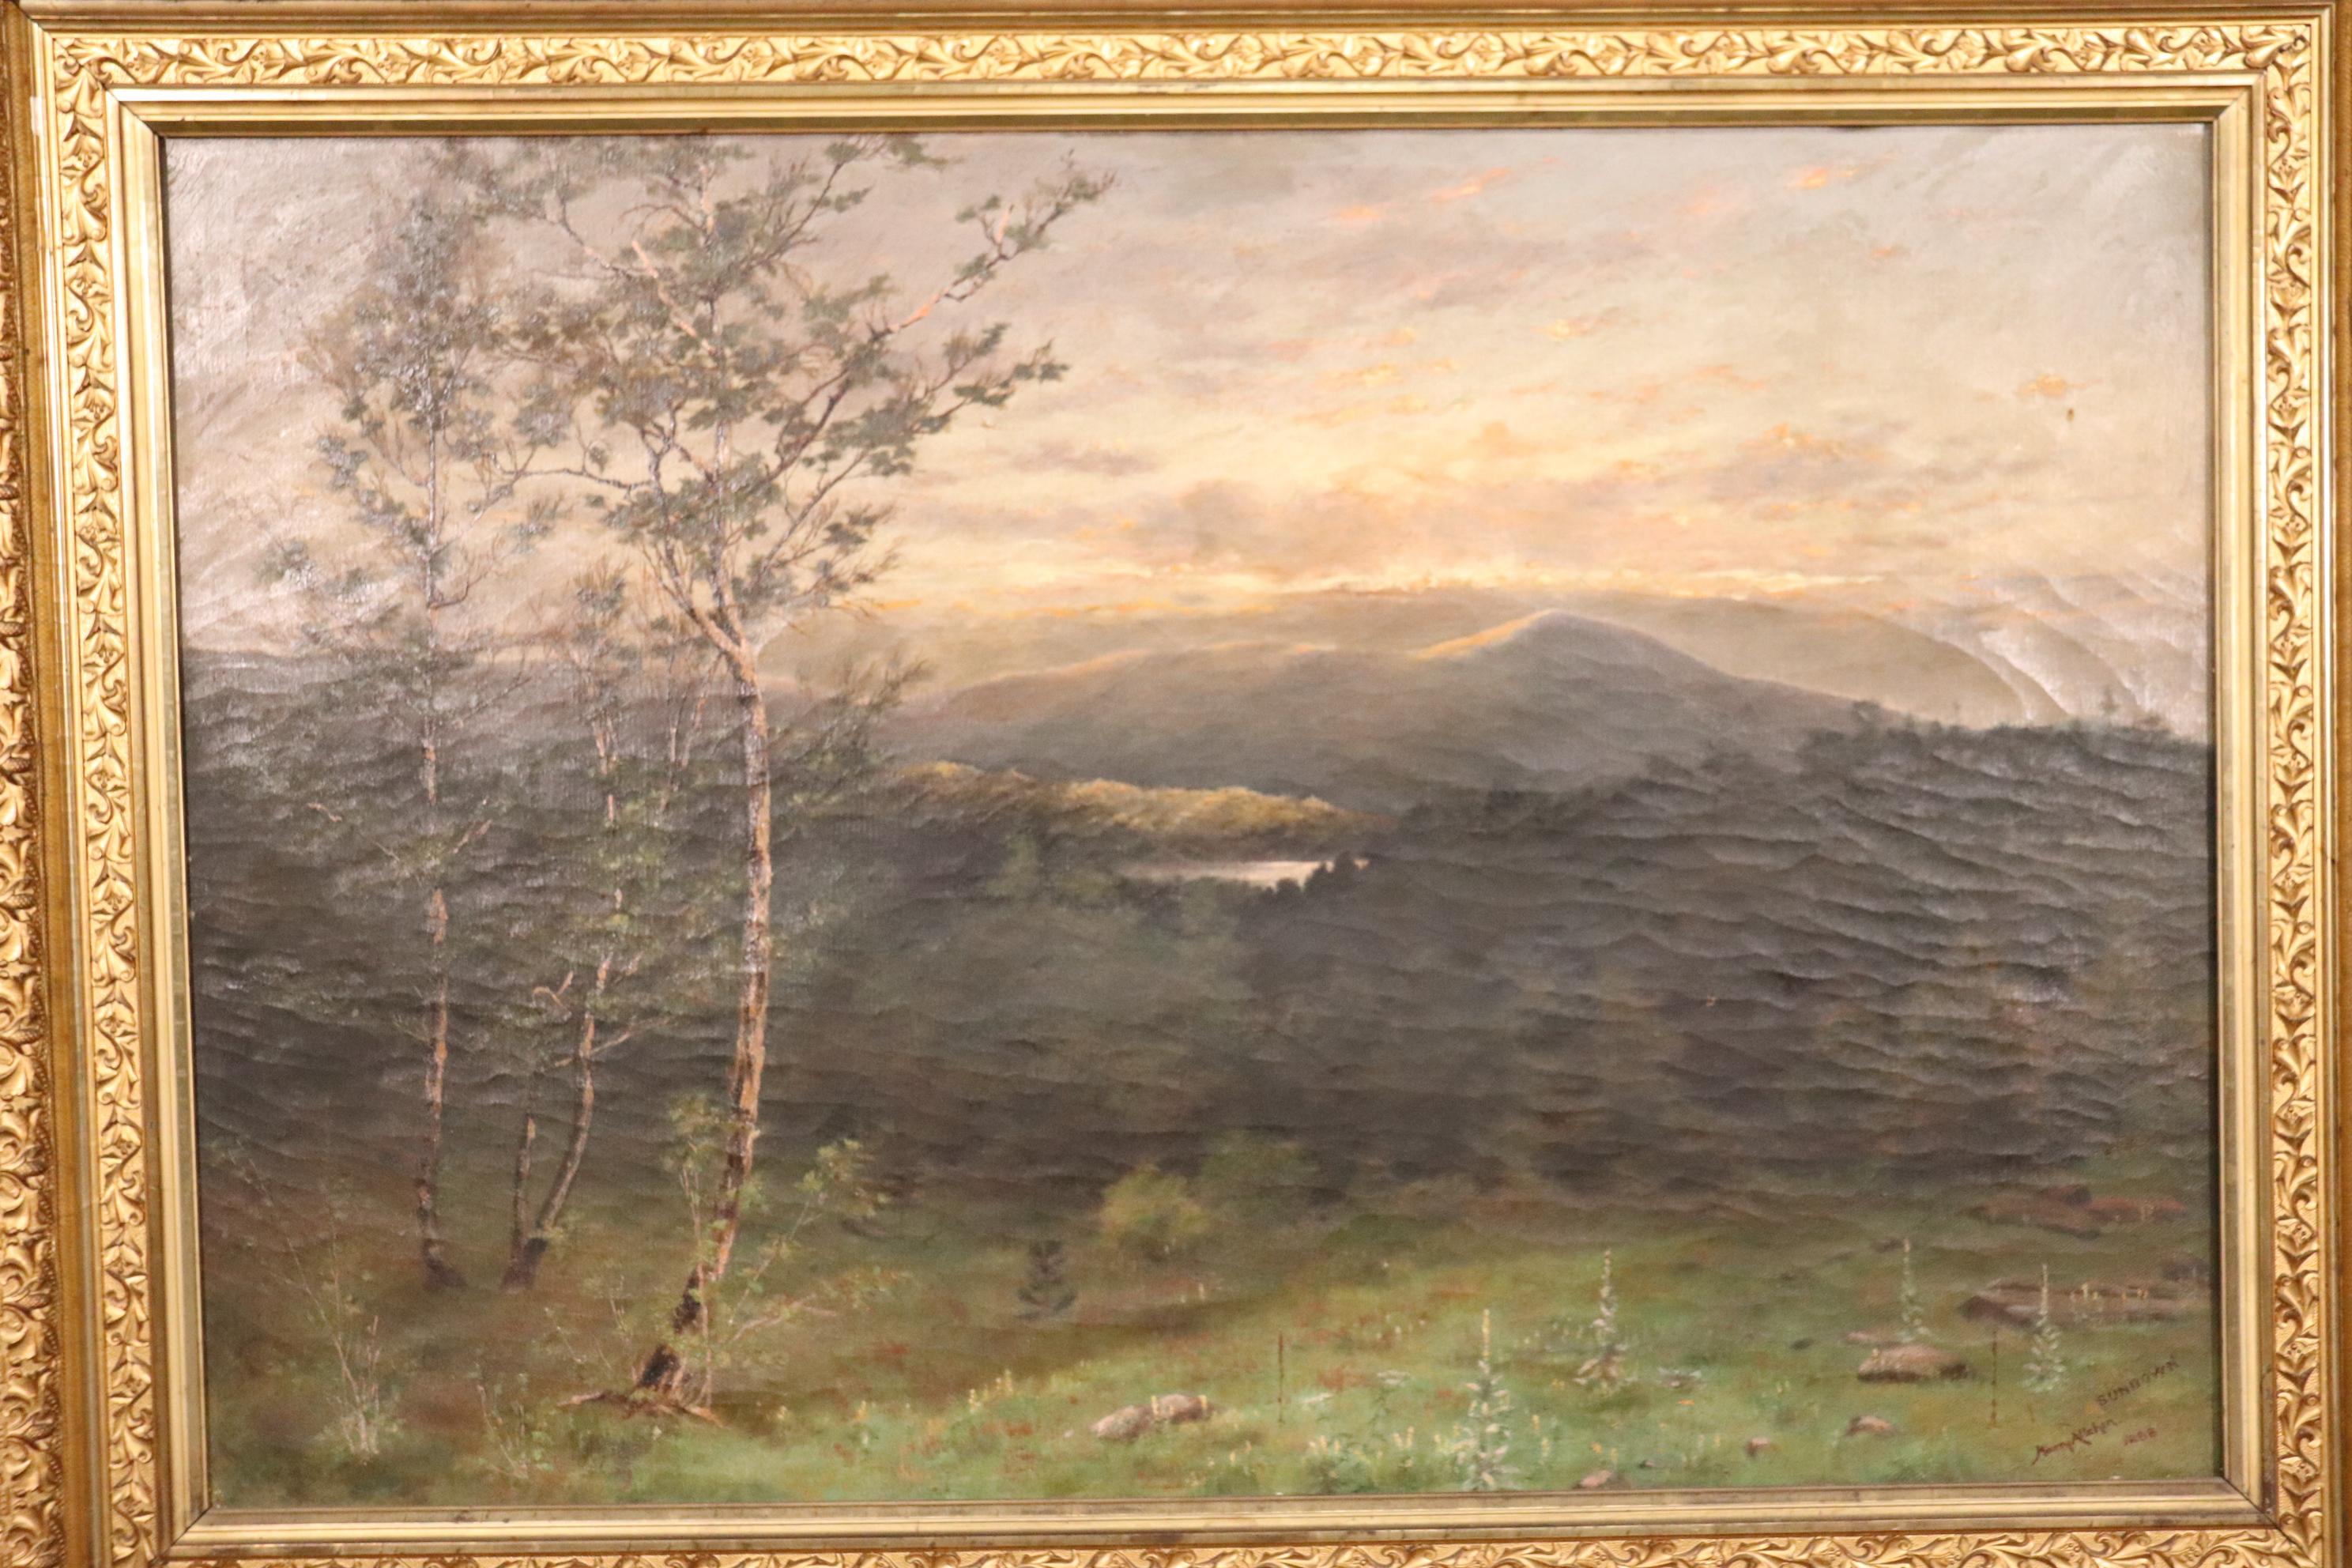 This is a beautiful painting by Sir William Henry Allchin. The painting is in good condition and has a wonderful frame and scenery. The painting measures: 34.5 tall x 46.75 wide x 3.75 deep. The painting itself measures: 25.5 inches tall x 37.5 wide.